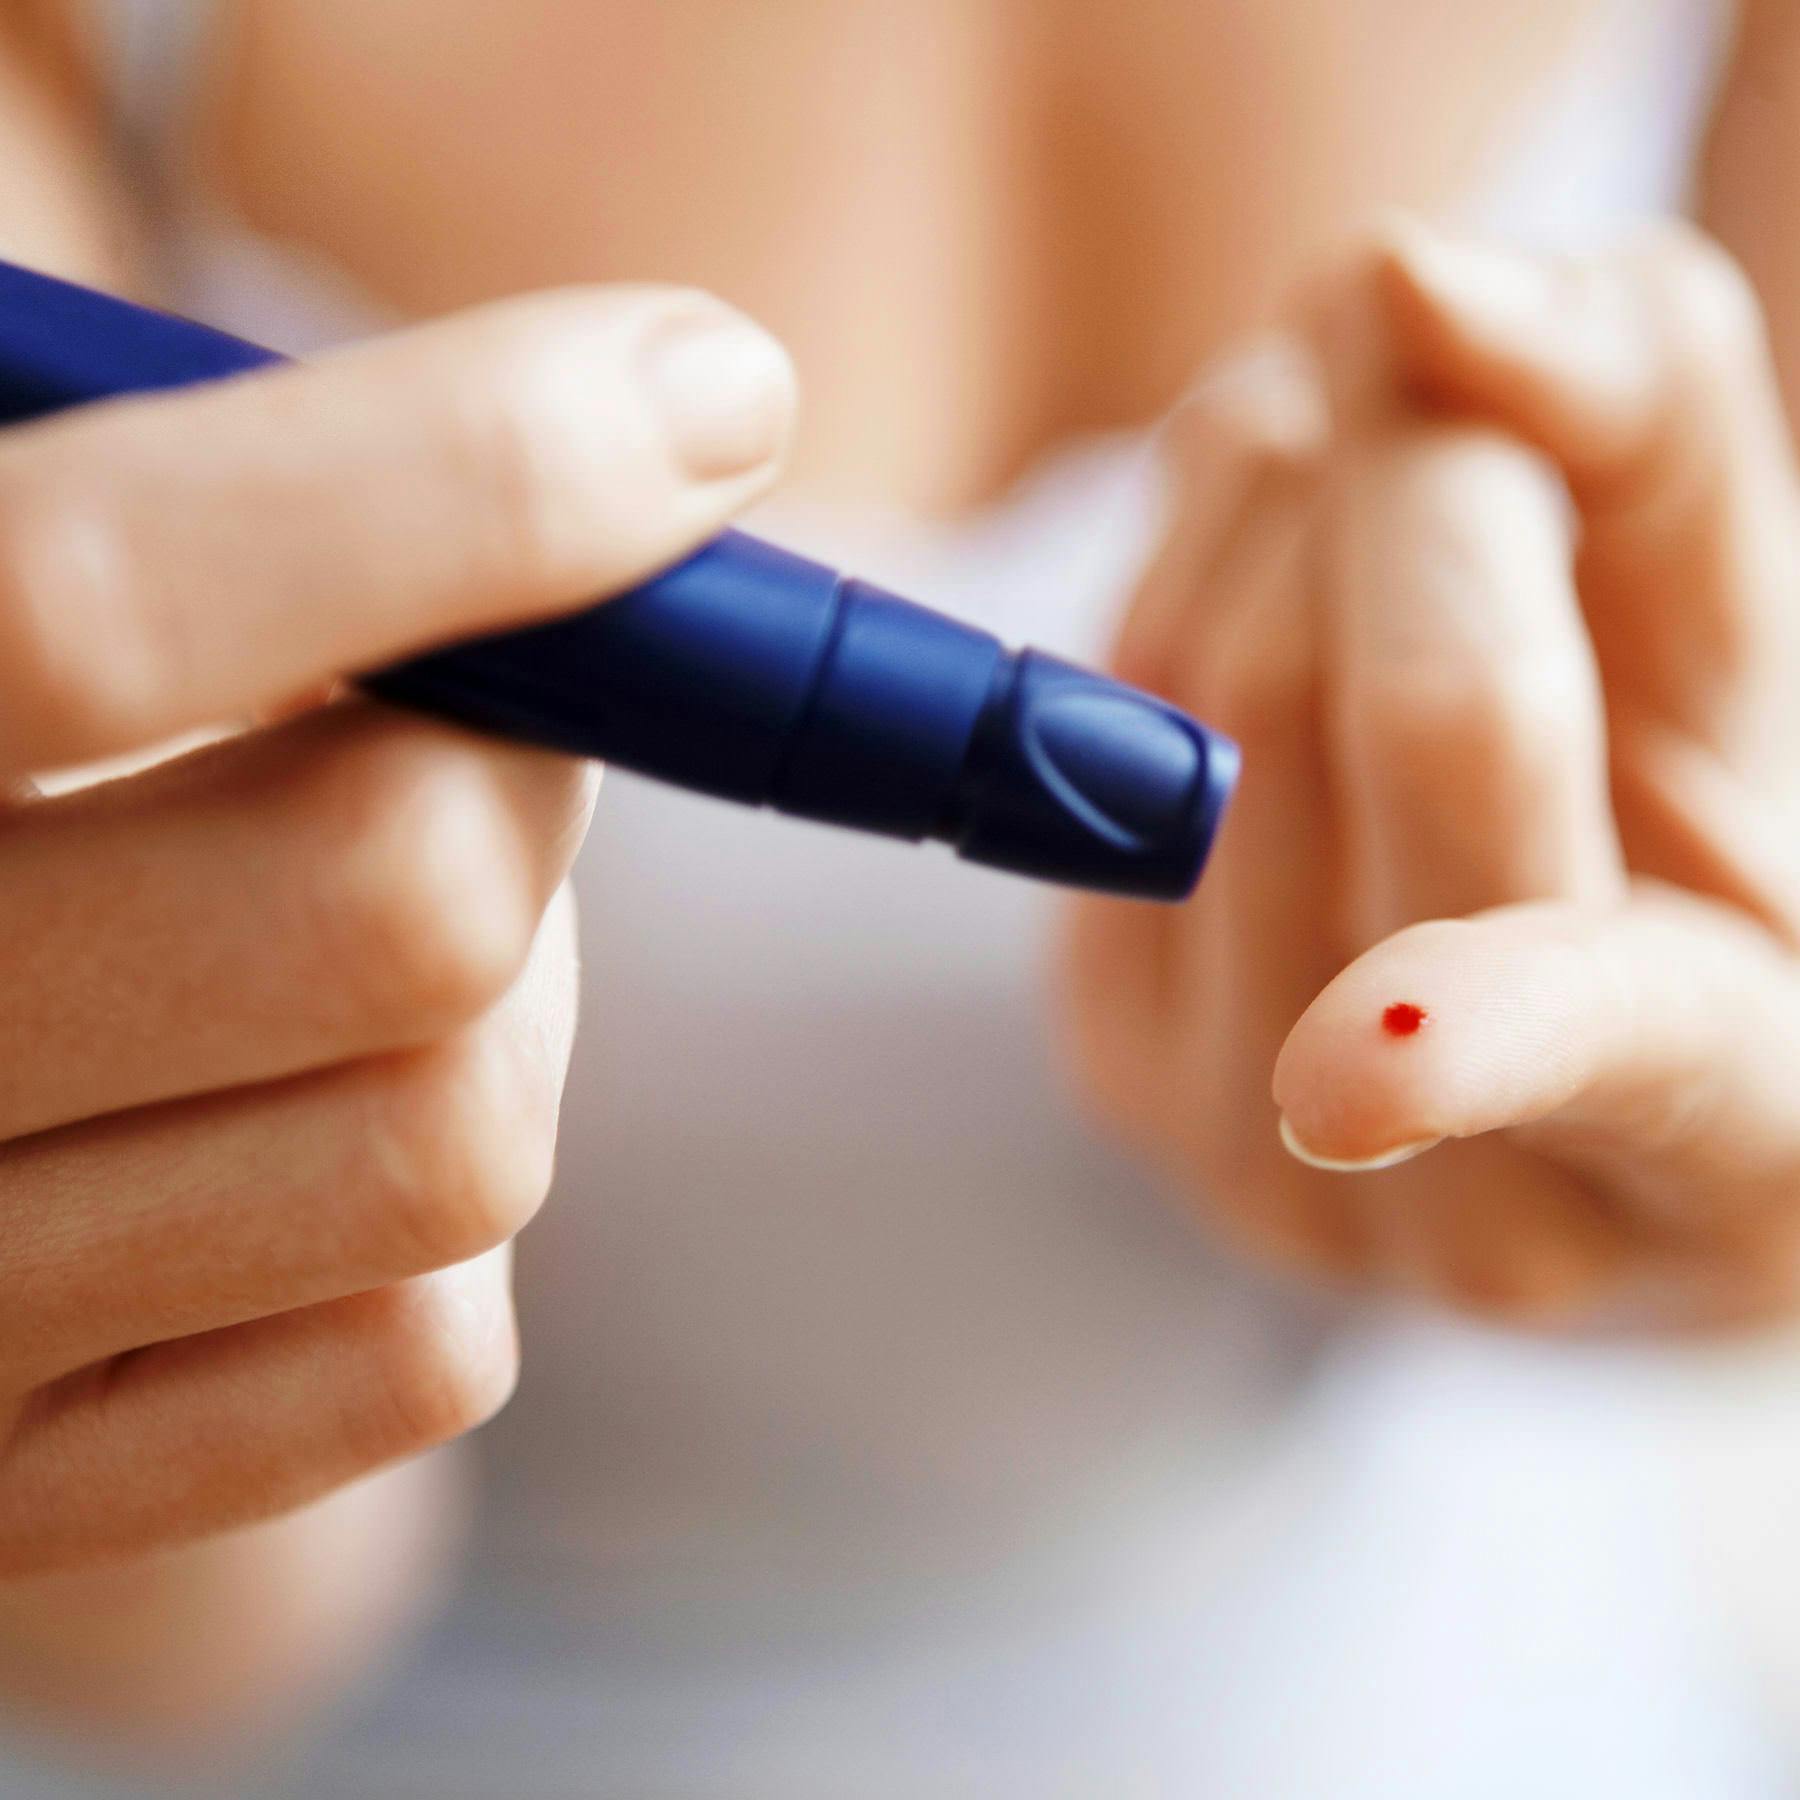 Taking a blood sugar reading with a lancet, diabetes risk